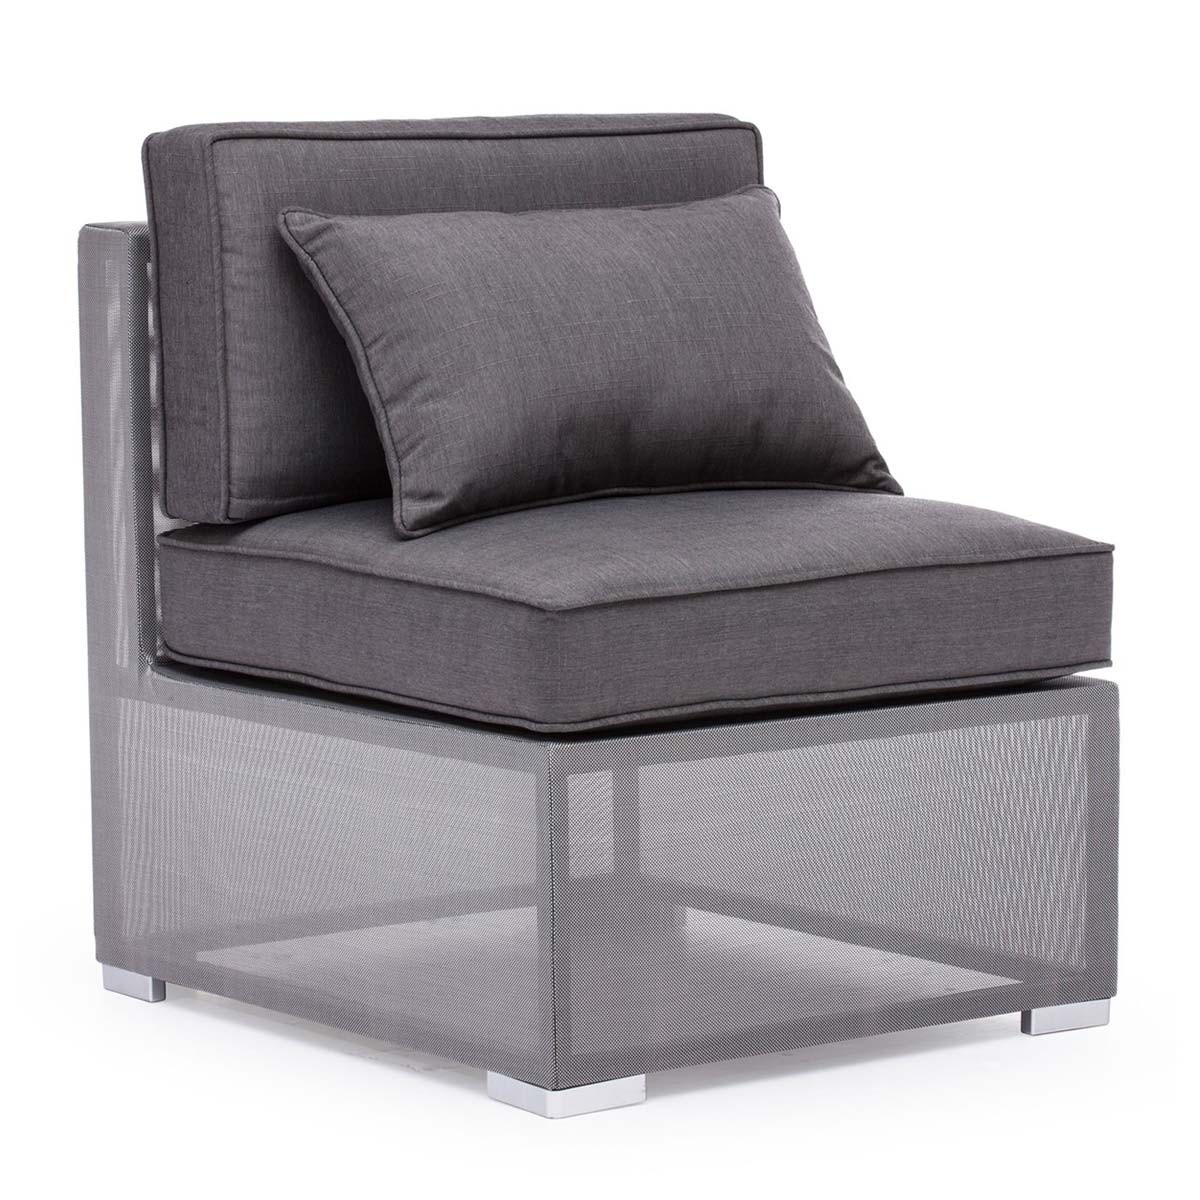 Zuo Modern Clear Water Bay Middle Chair - Gray